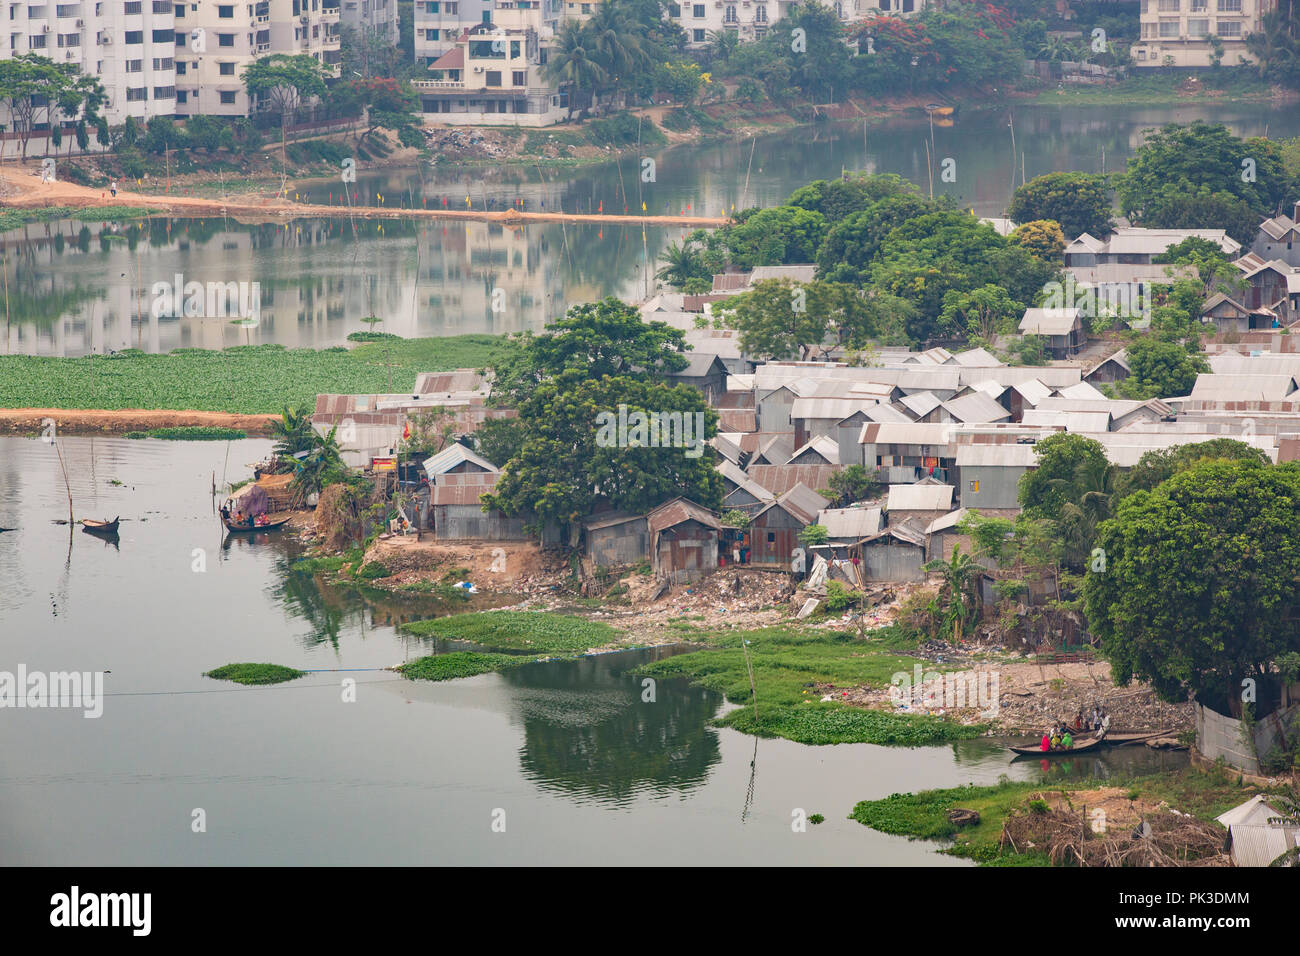 A view looking down on a slum on the banks of a river in Dhaka, Bangladesh Stock Photo